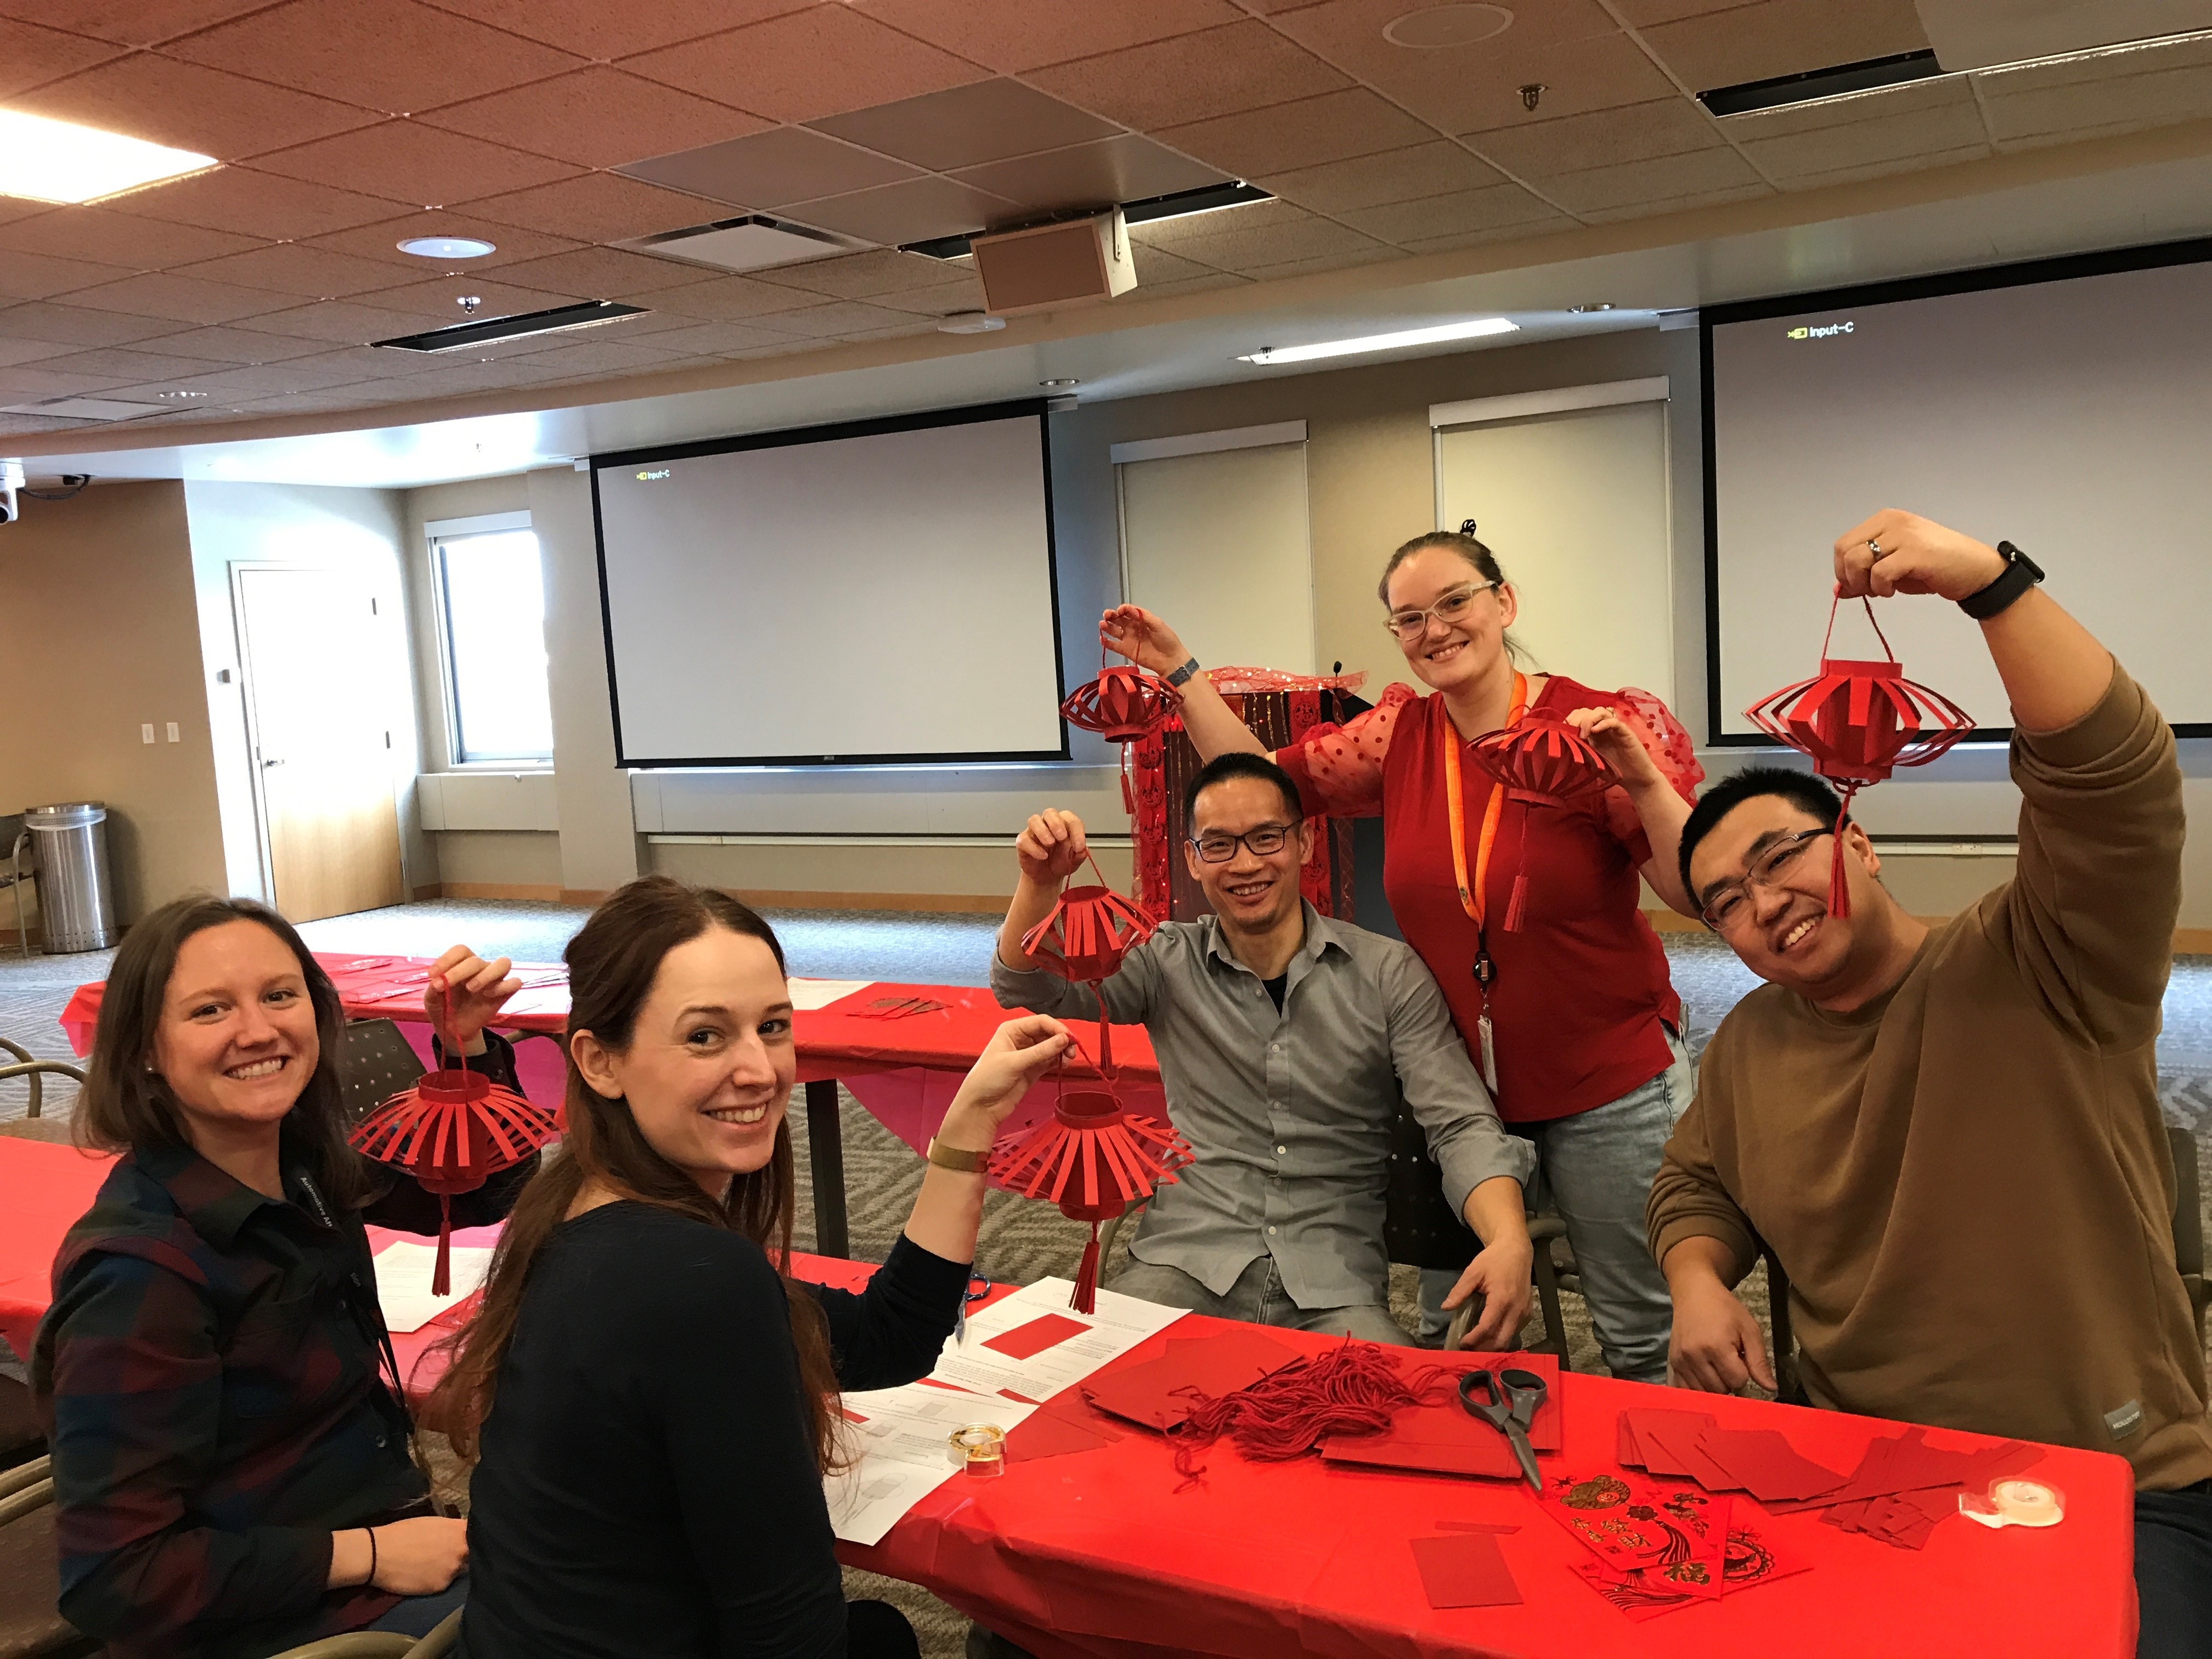 Five people holding up red lanterns in a conference room celebrating Diwali.